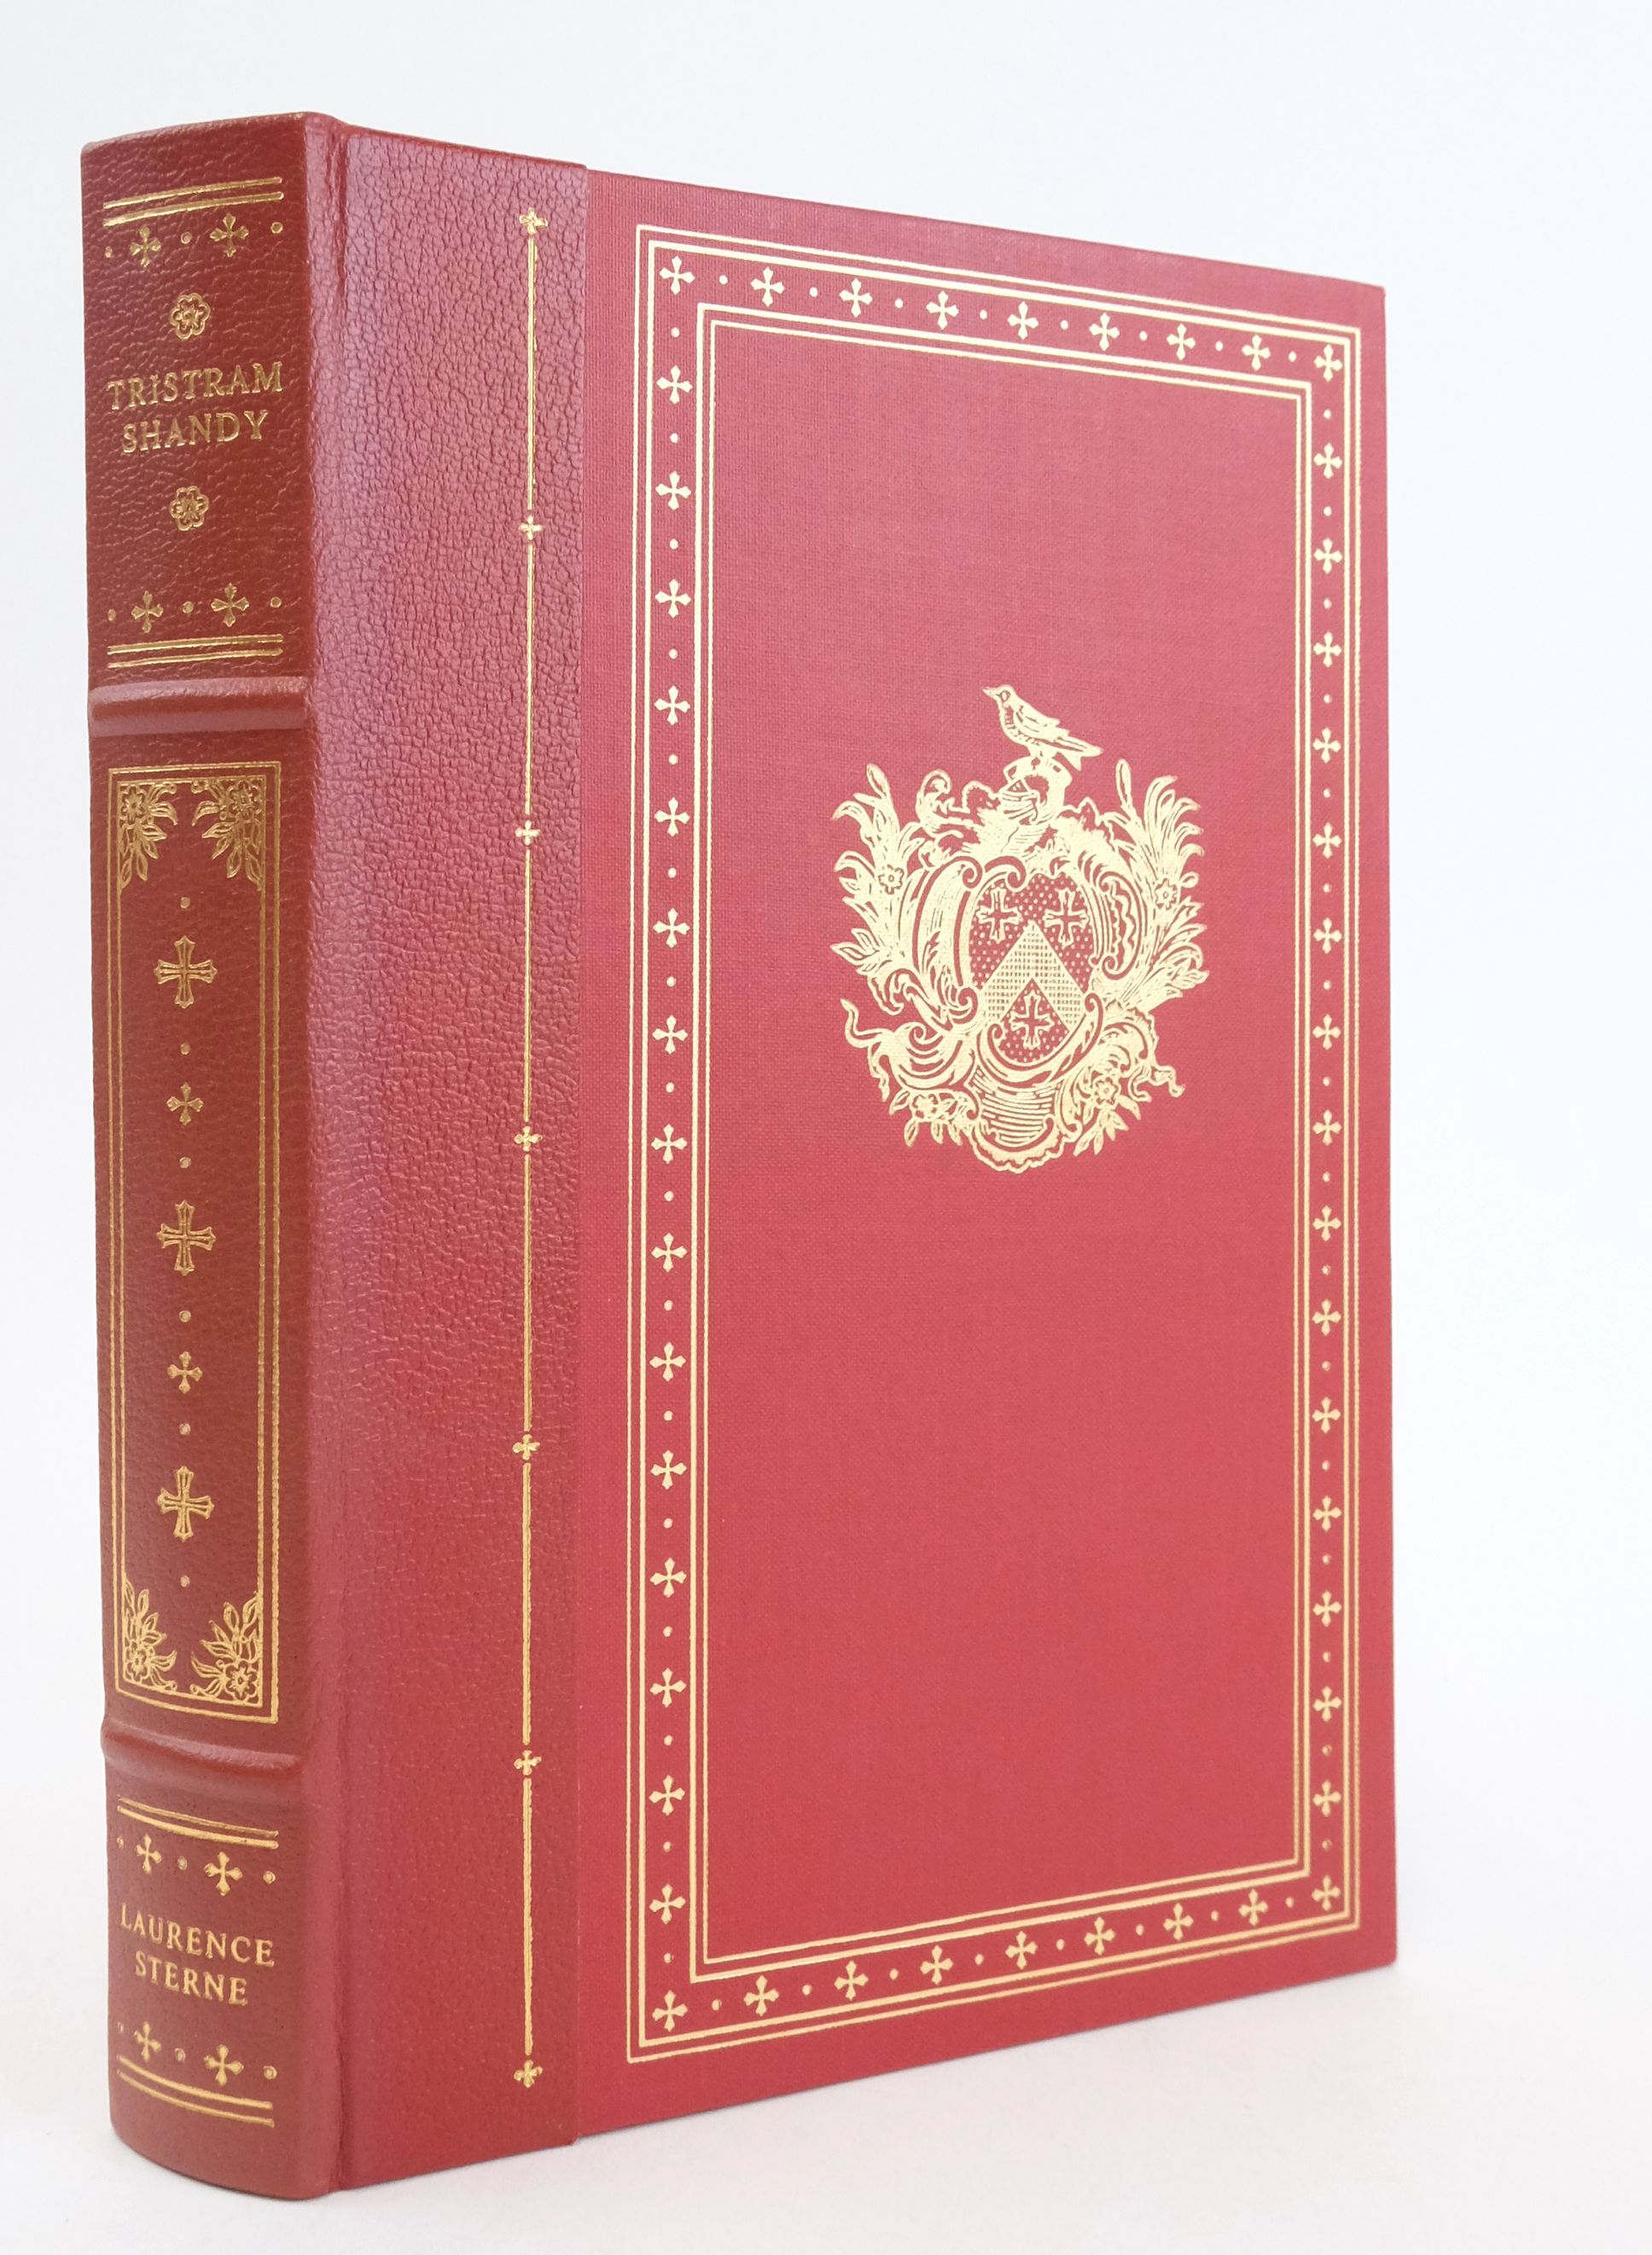 Photo of THE LIFE &amp; OPINIONS OF TRISTRAM SHANDY GENTLEMAN written by Sterne, Laurence illustrated by Furniss, Harry published by Franklin Library (STOCK CODE: 1824308)  for sale by Stella & Rose's Books